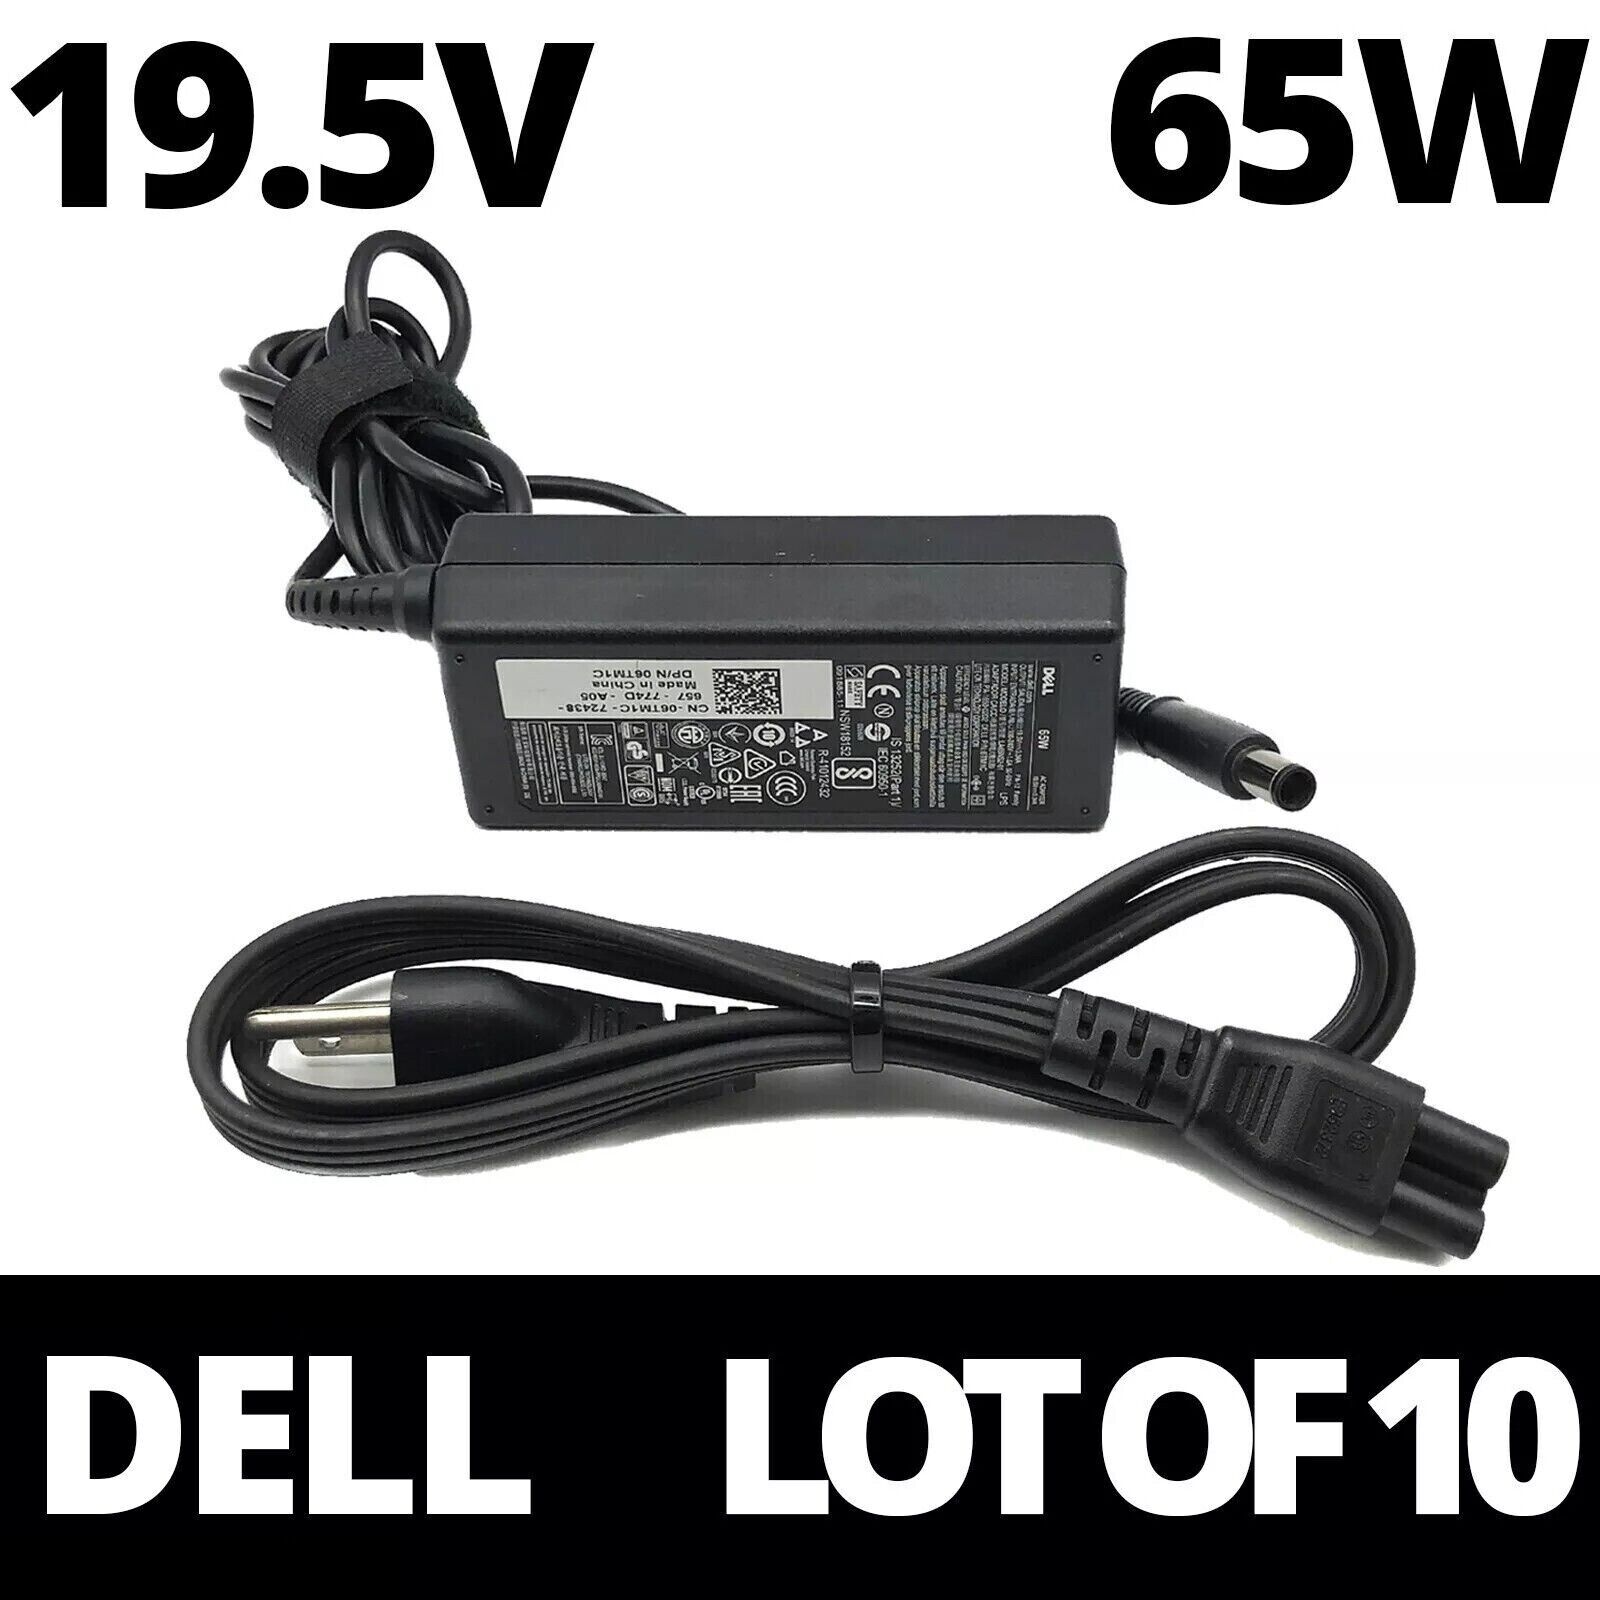 Lot of 10 Dell OEM 65W 19.5V AC Adapter Charger +Cords 7.4mm LA65NM130 HA65NM130